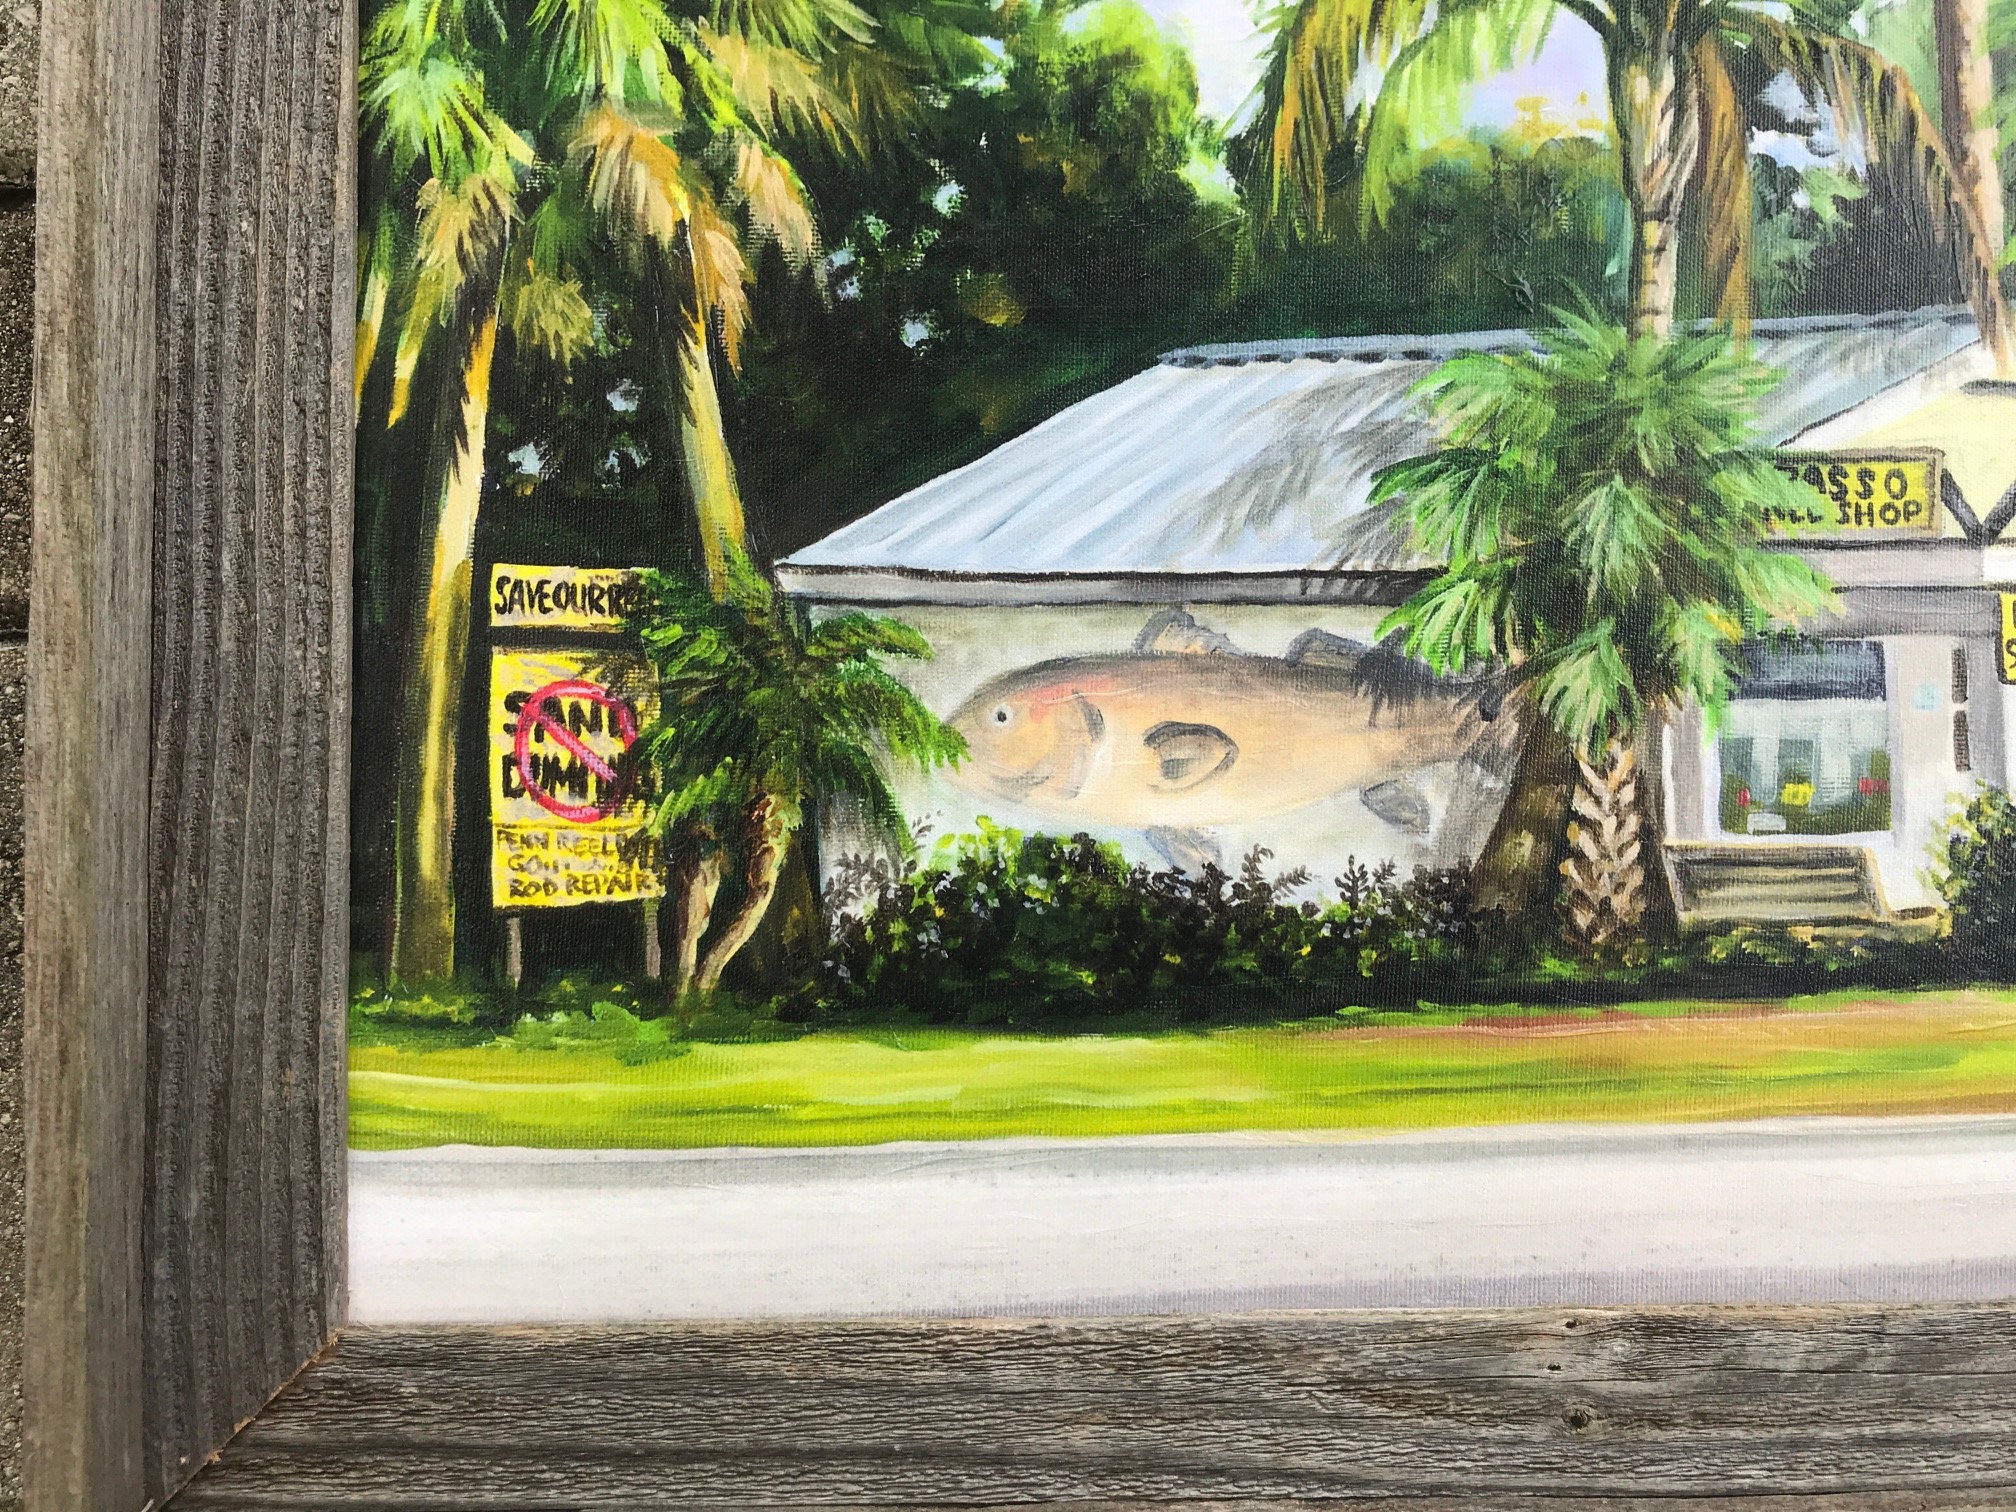 Wabasso Tackle Shop II , 18' X 24' Canvas Giclee Reproduction